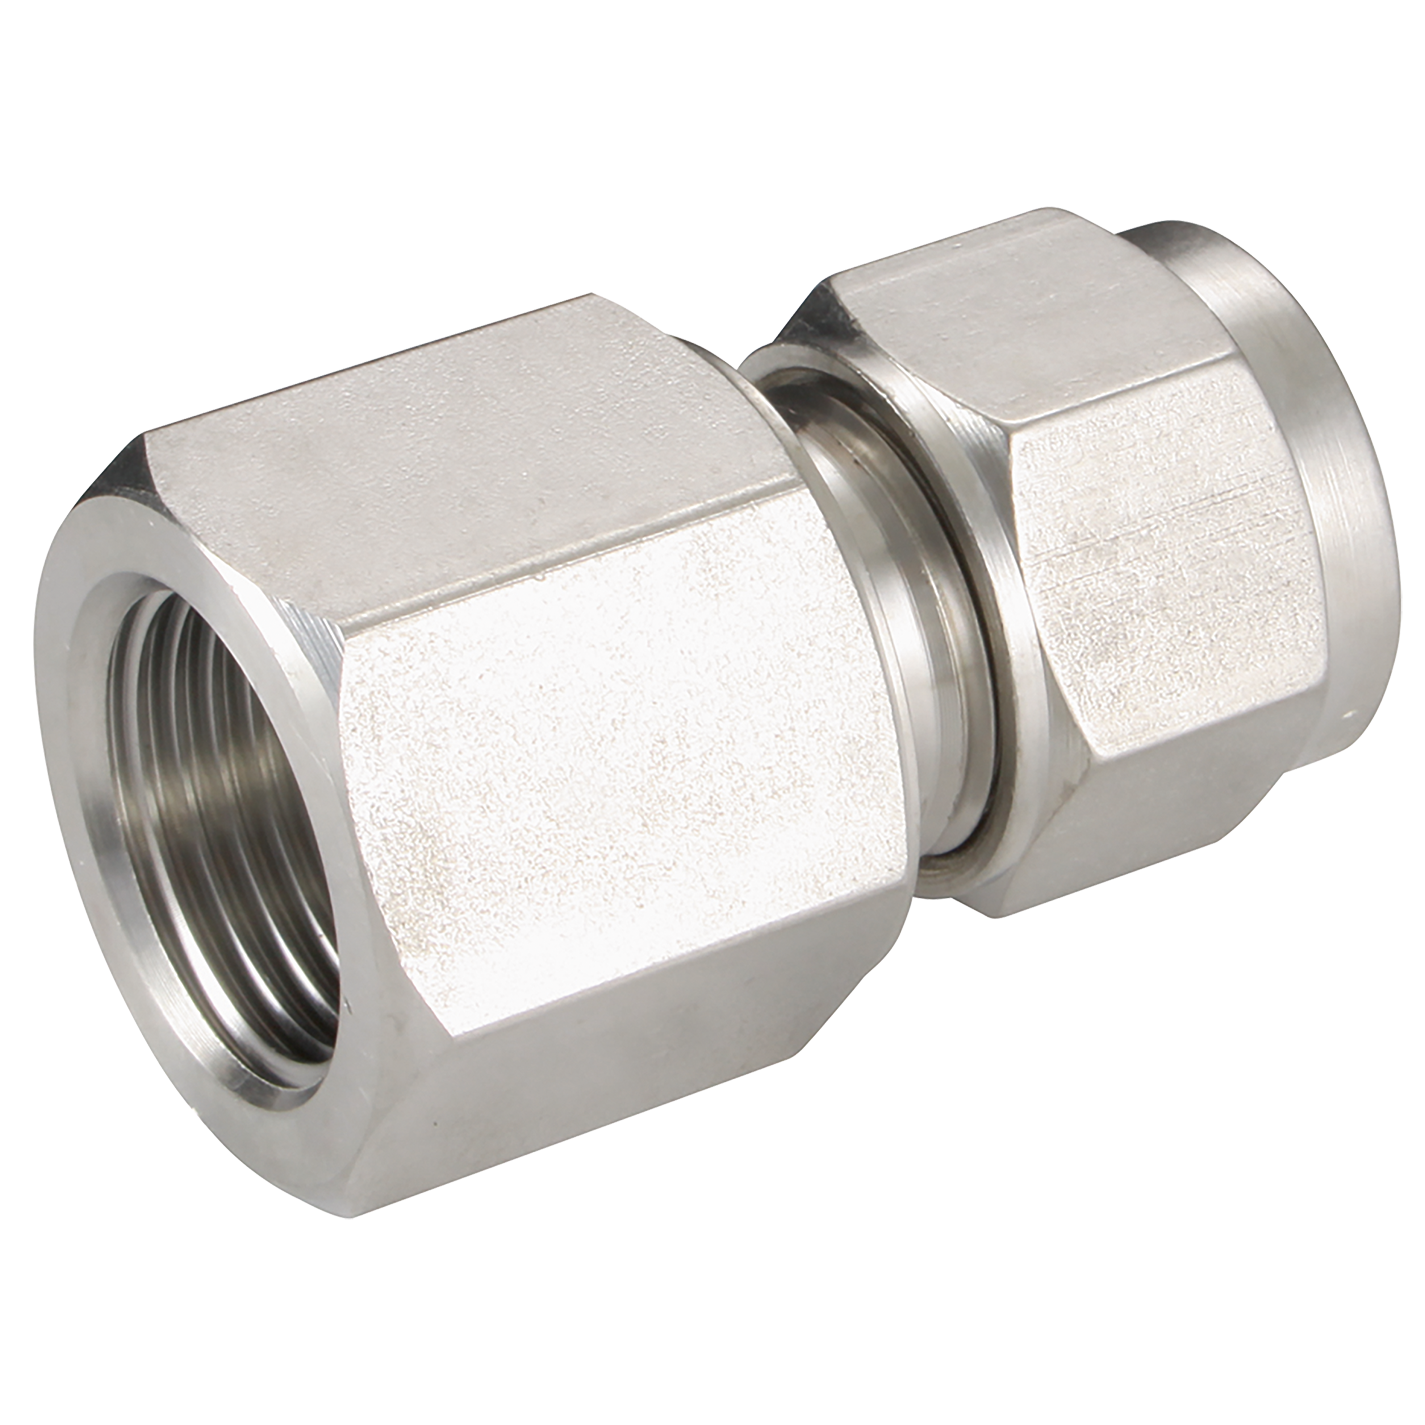 FEMALE ISO CONNECTOR 8 OD 1/8 BSPT